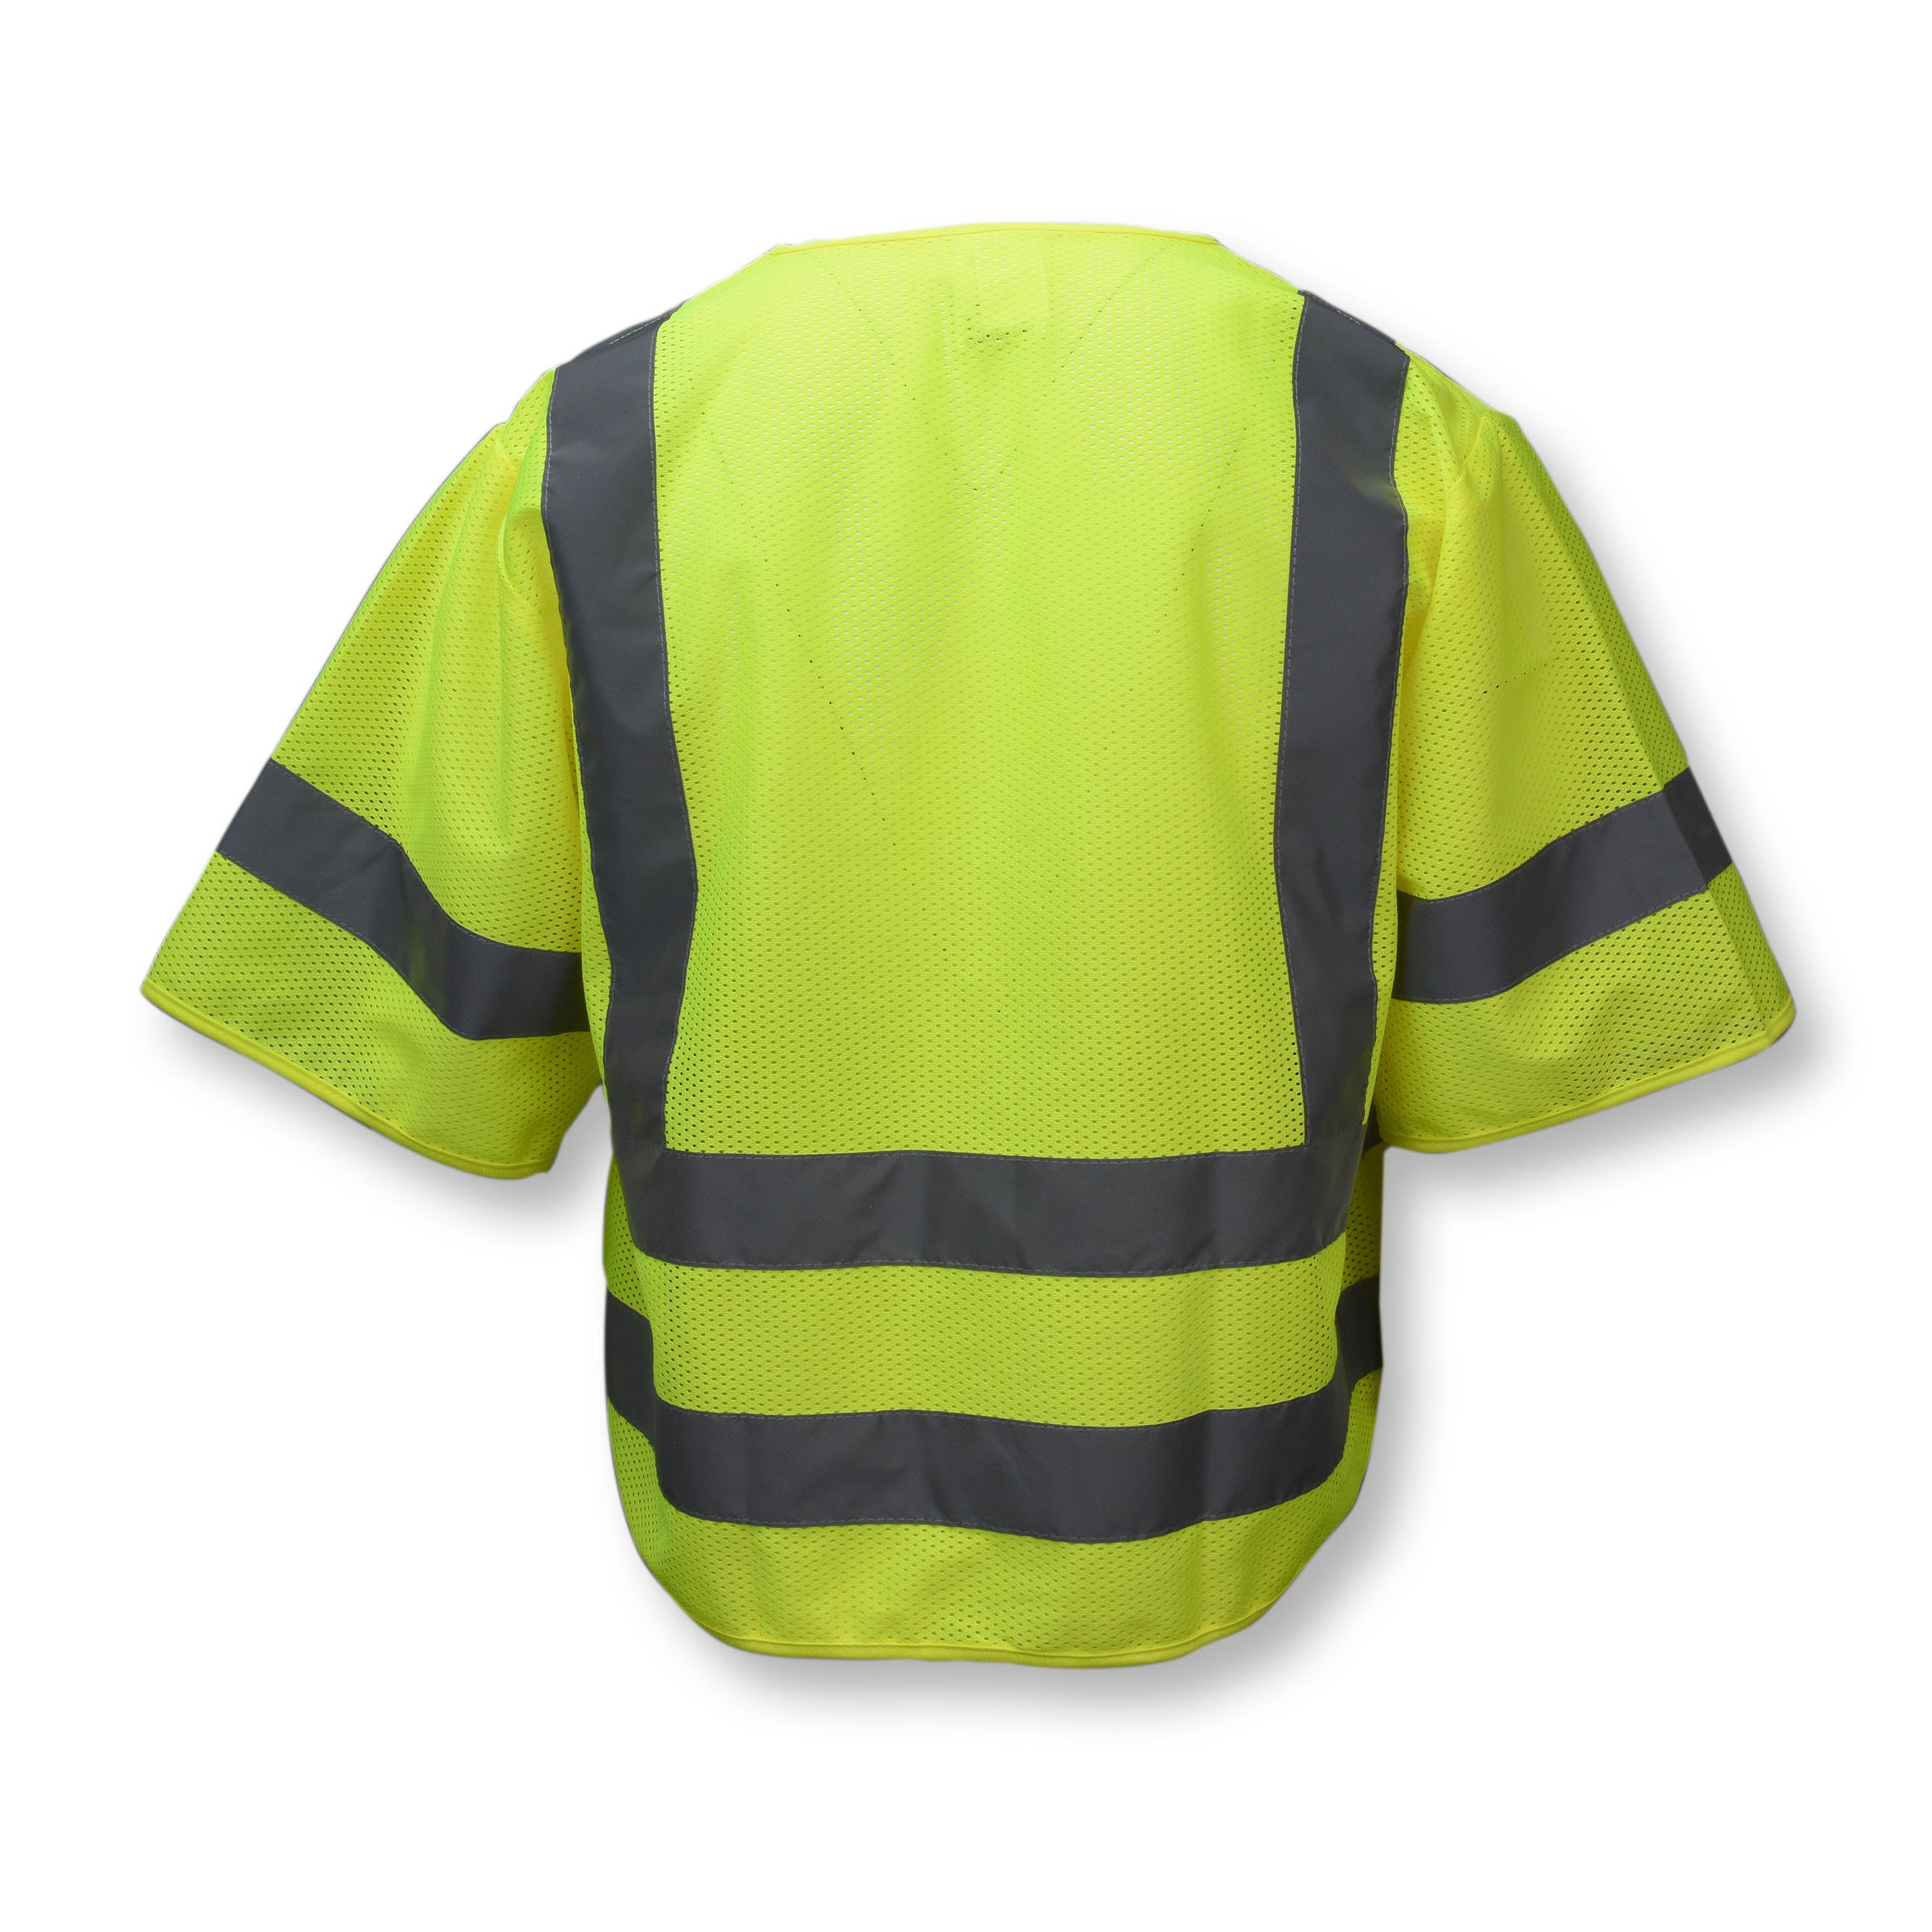 Radians SV83 Standard Type R Class 3 Mesh Safety Vest (Plus Sizes Only)